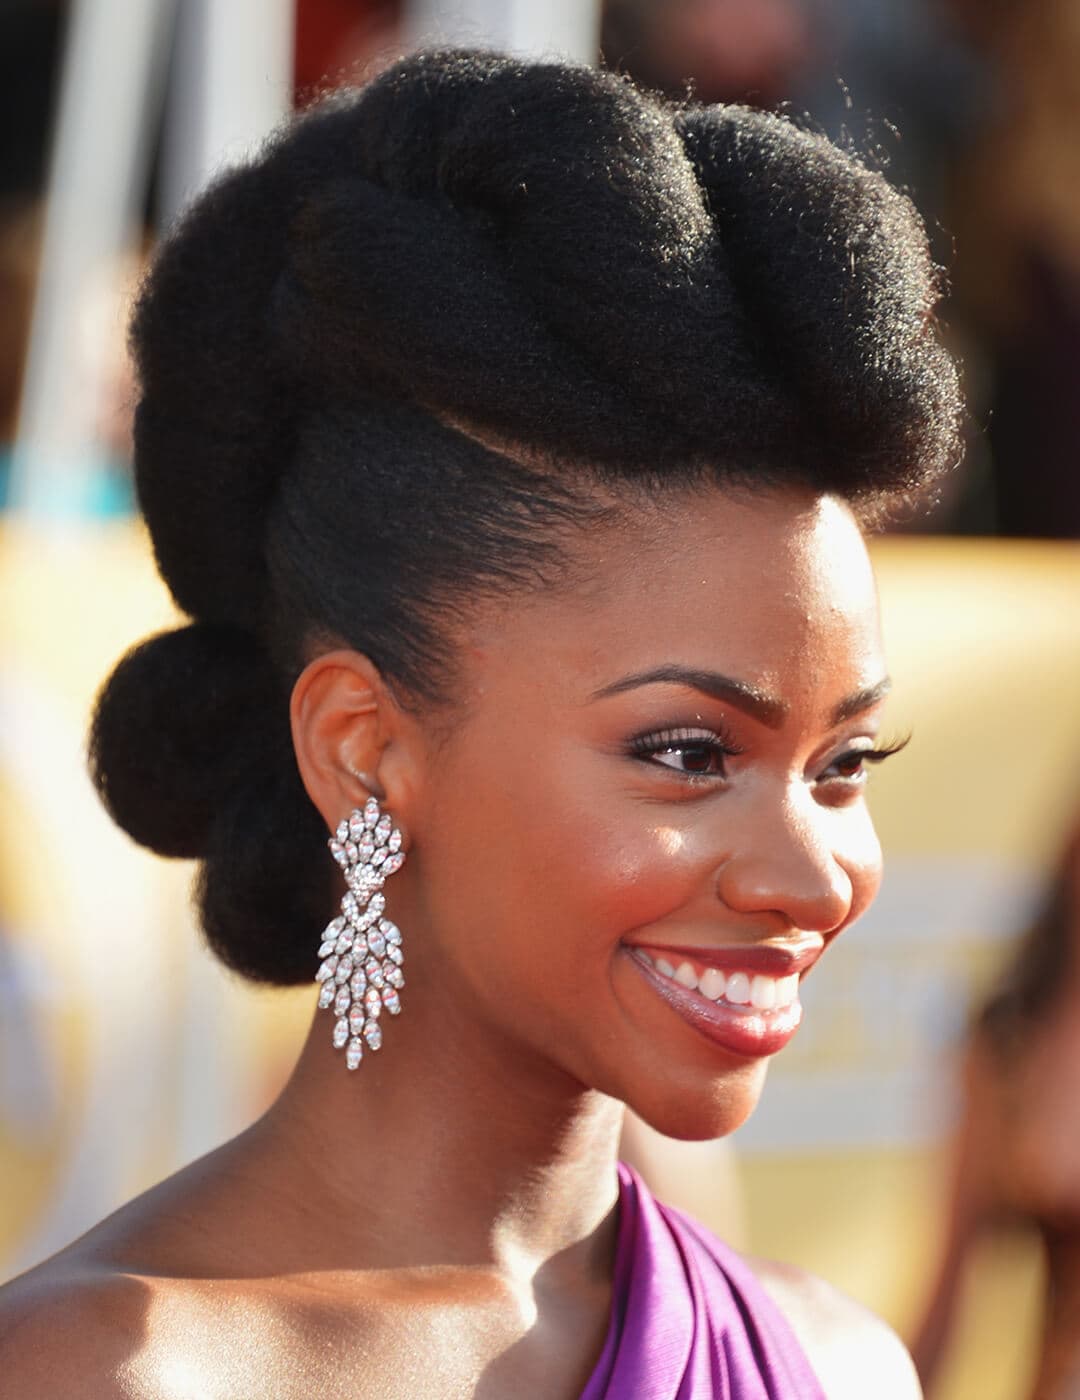 Close-up of Teyonah Parris looking glamorous with a classic up-do hairstyle and dangling diamond earrings